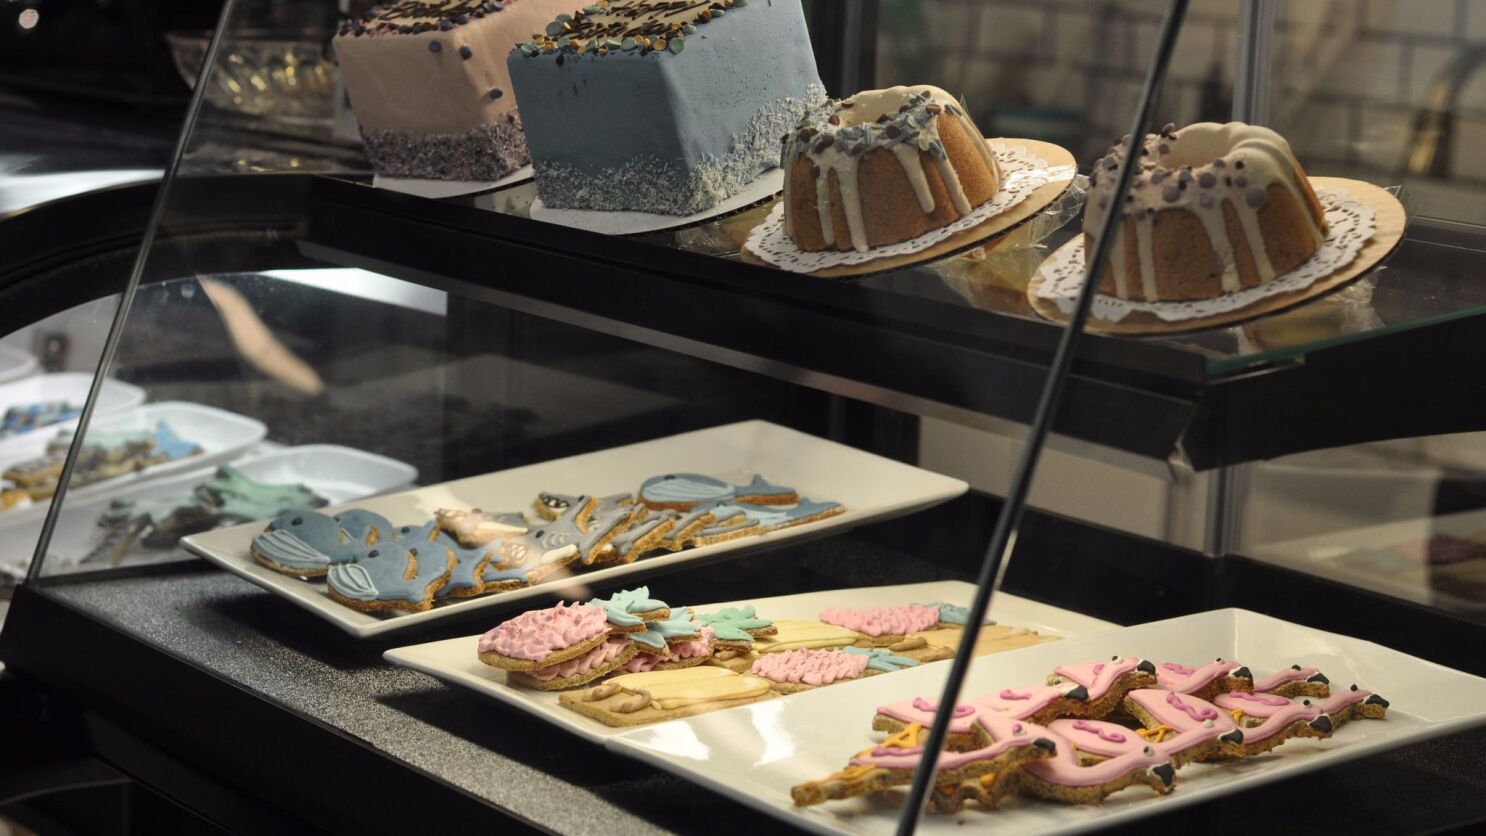 Four Great Dog Bakeries In And Around L A Los Angeles Times